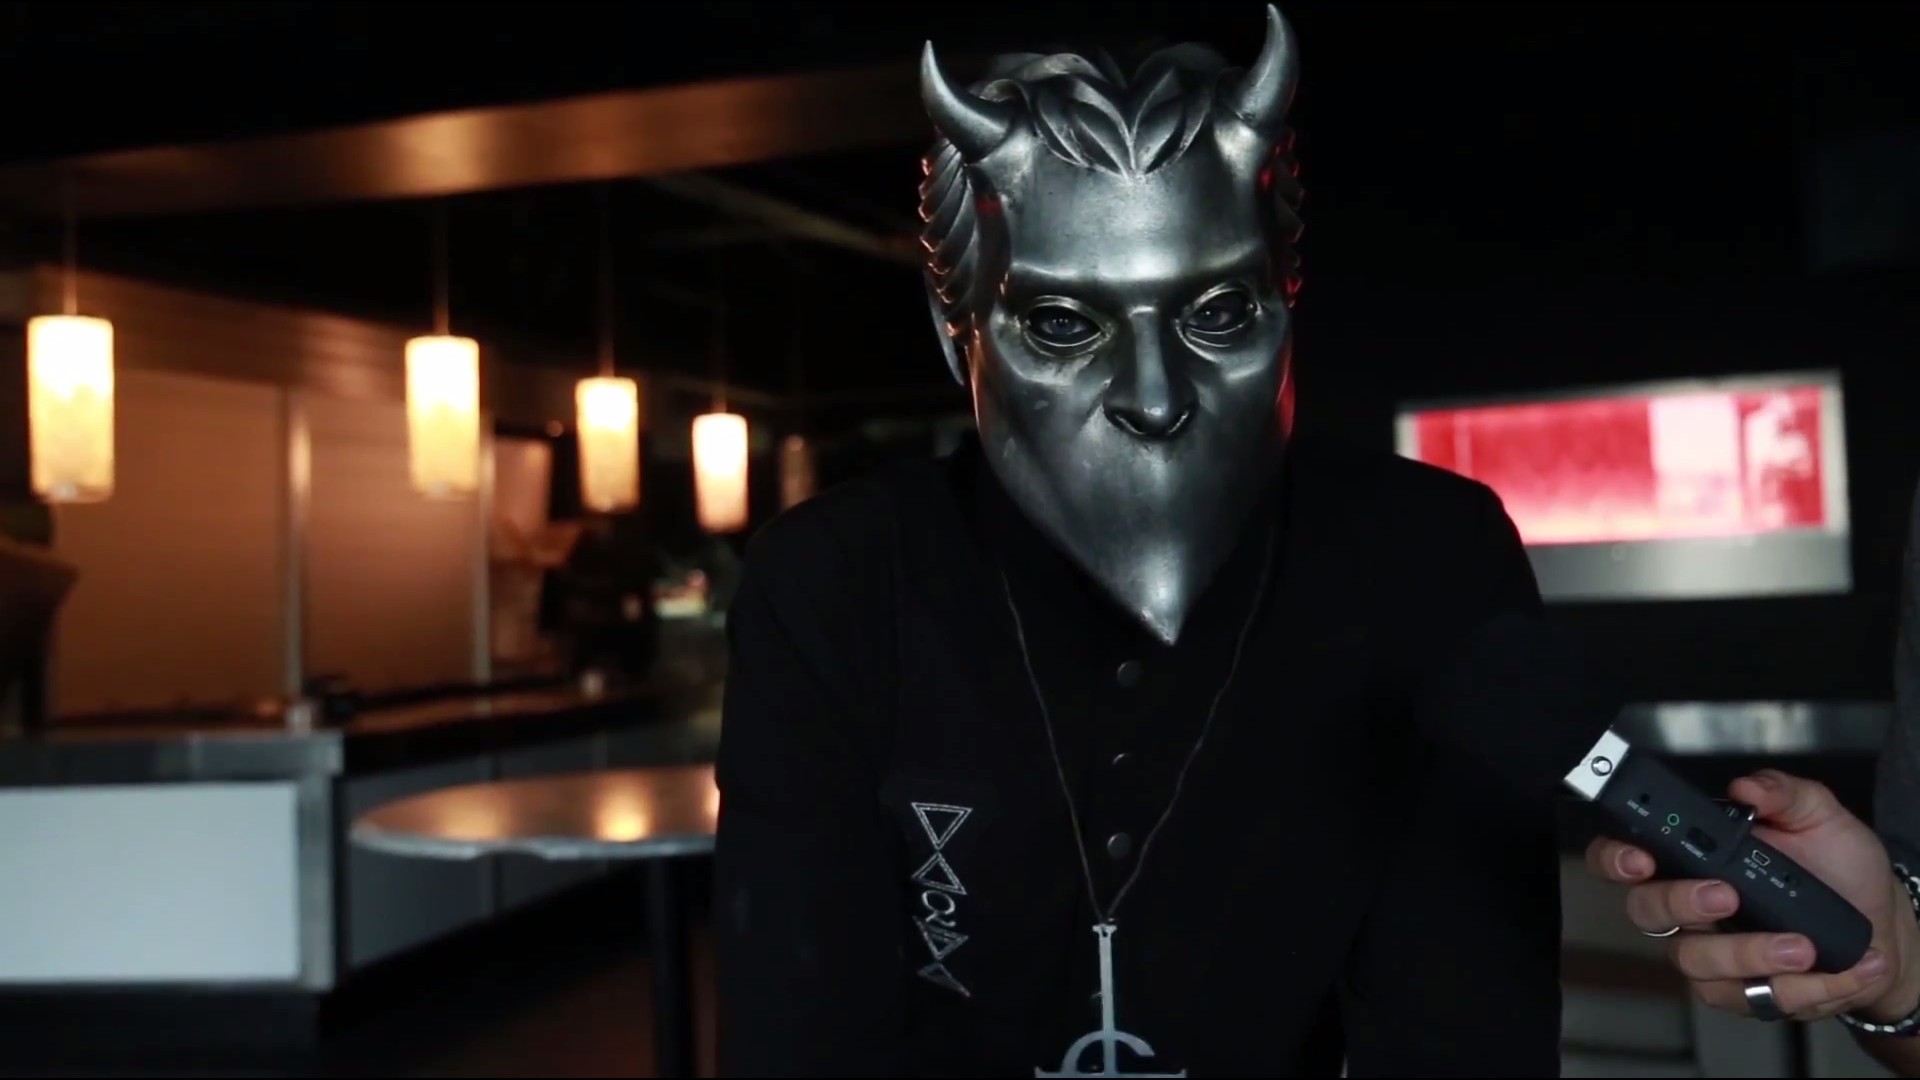 1920x1080 Ghost Band Mask Live In Limbo Interviews Ghost Children Of Ghost